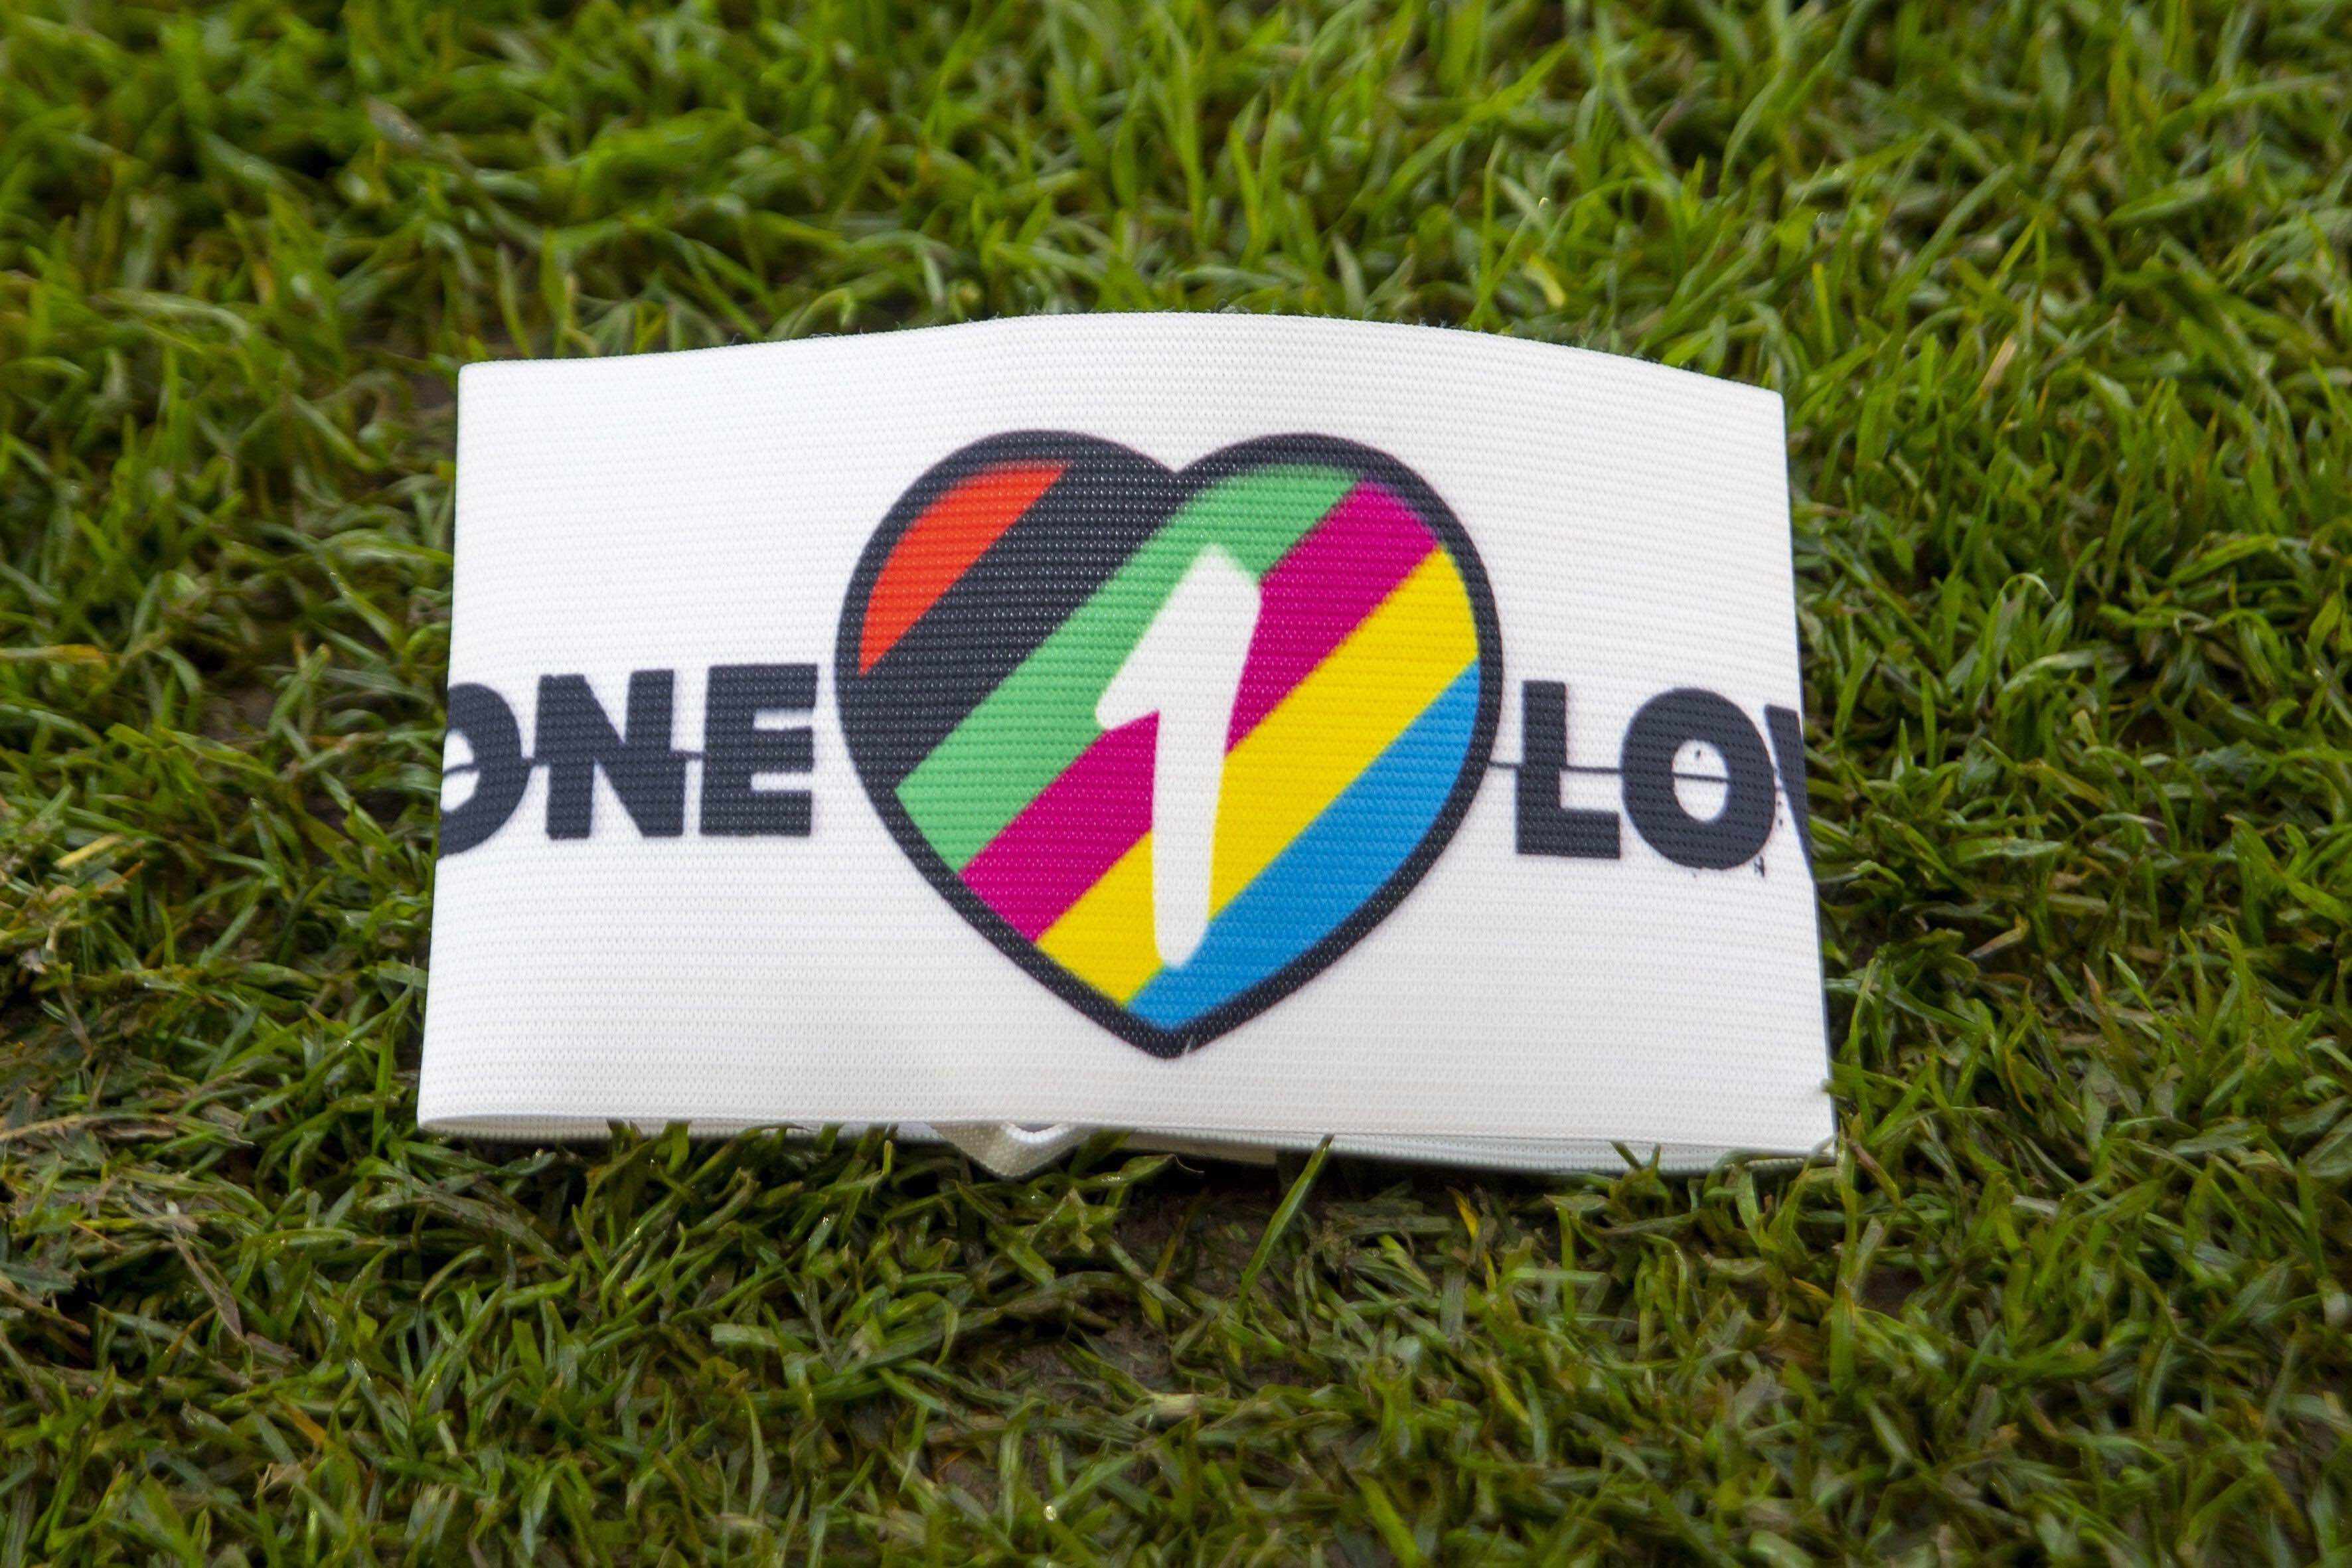 In defence of the One Love armband